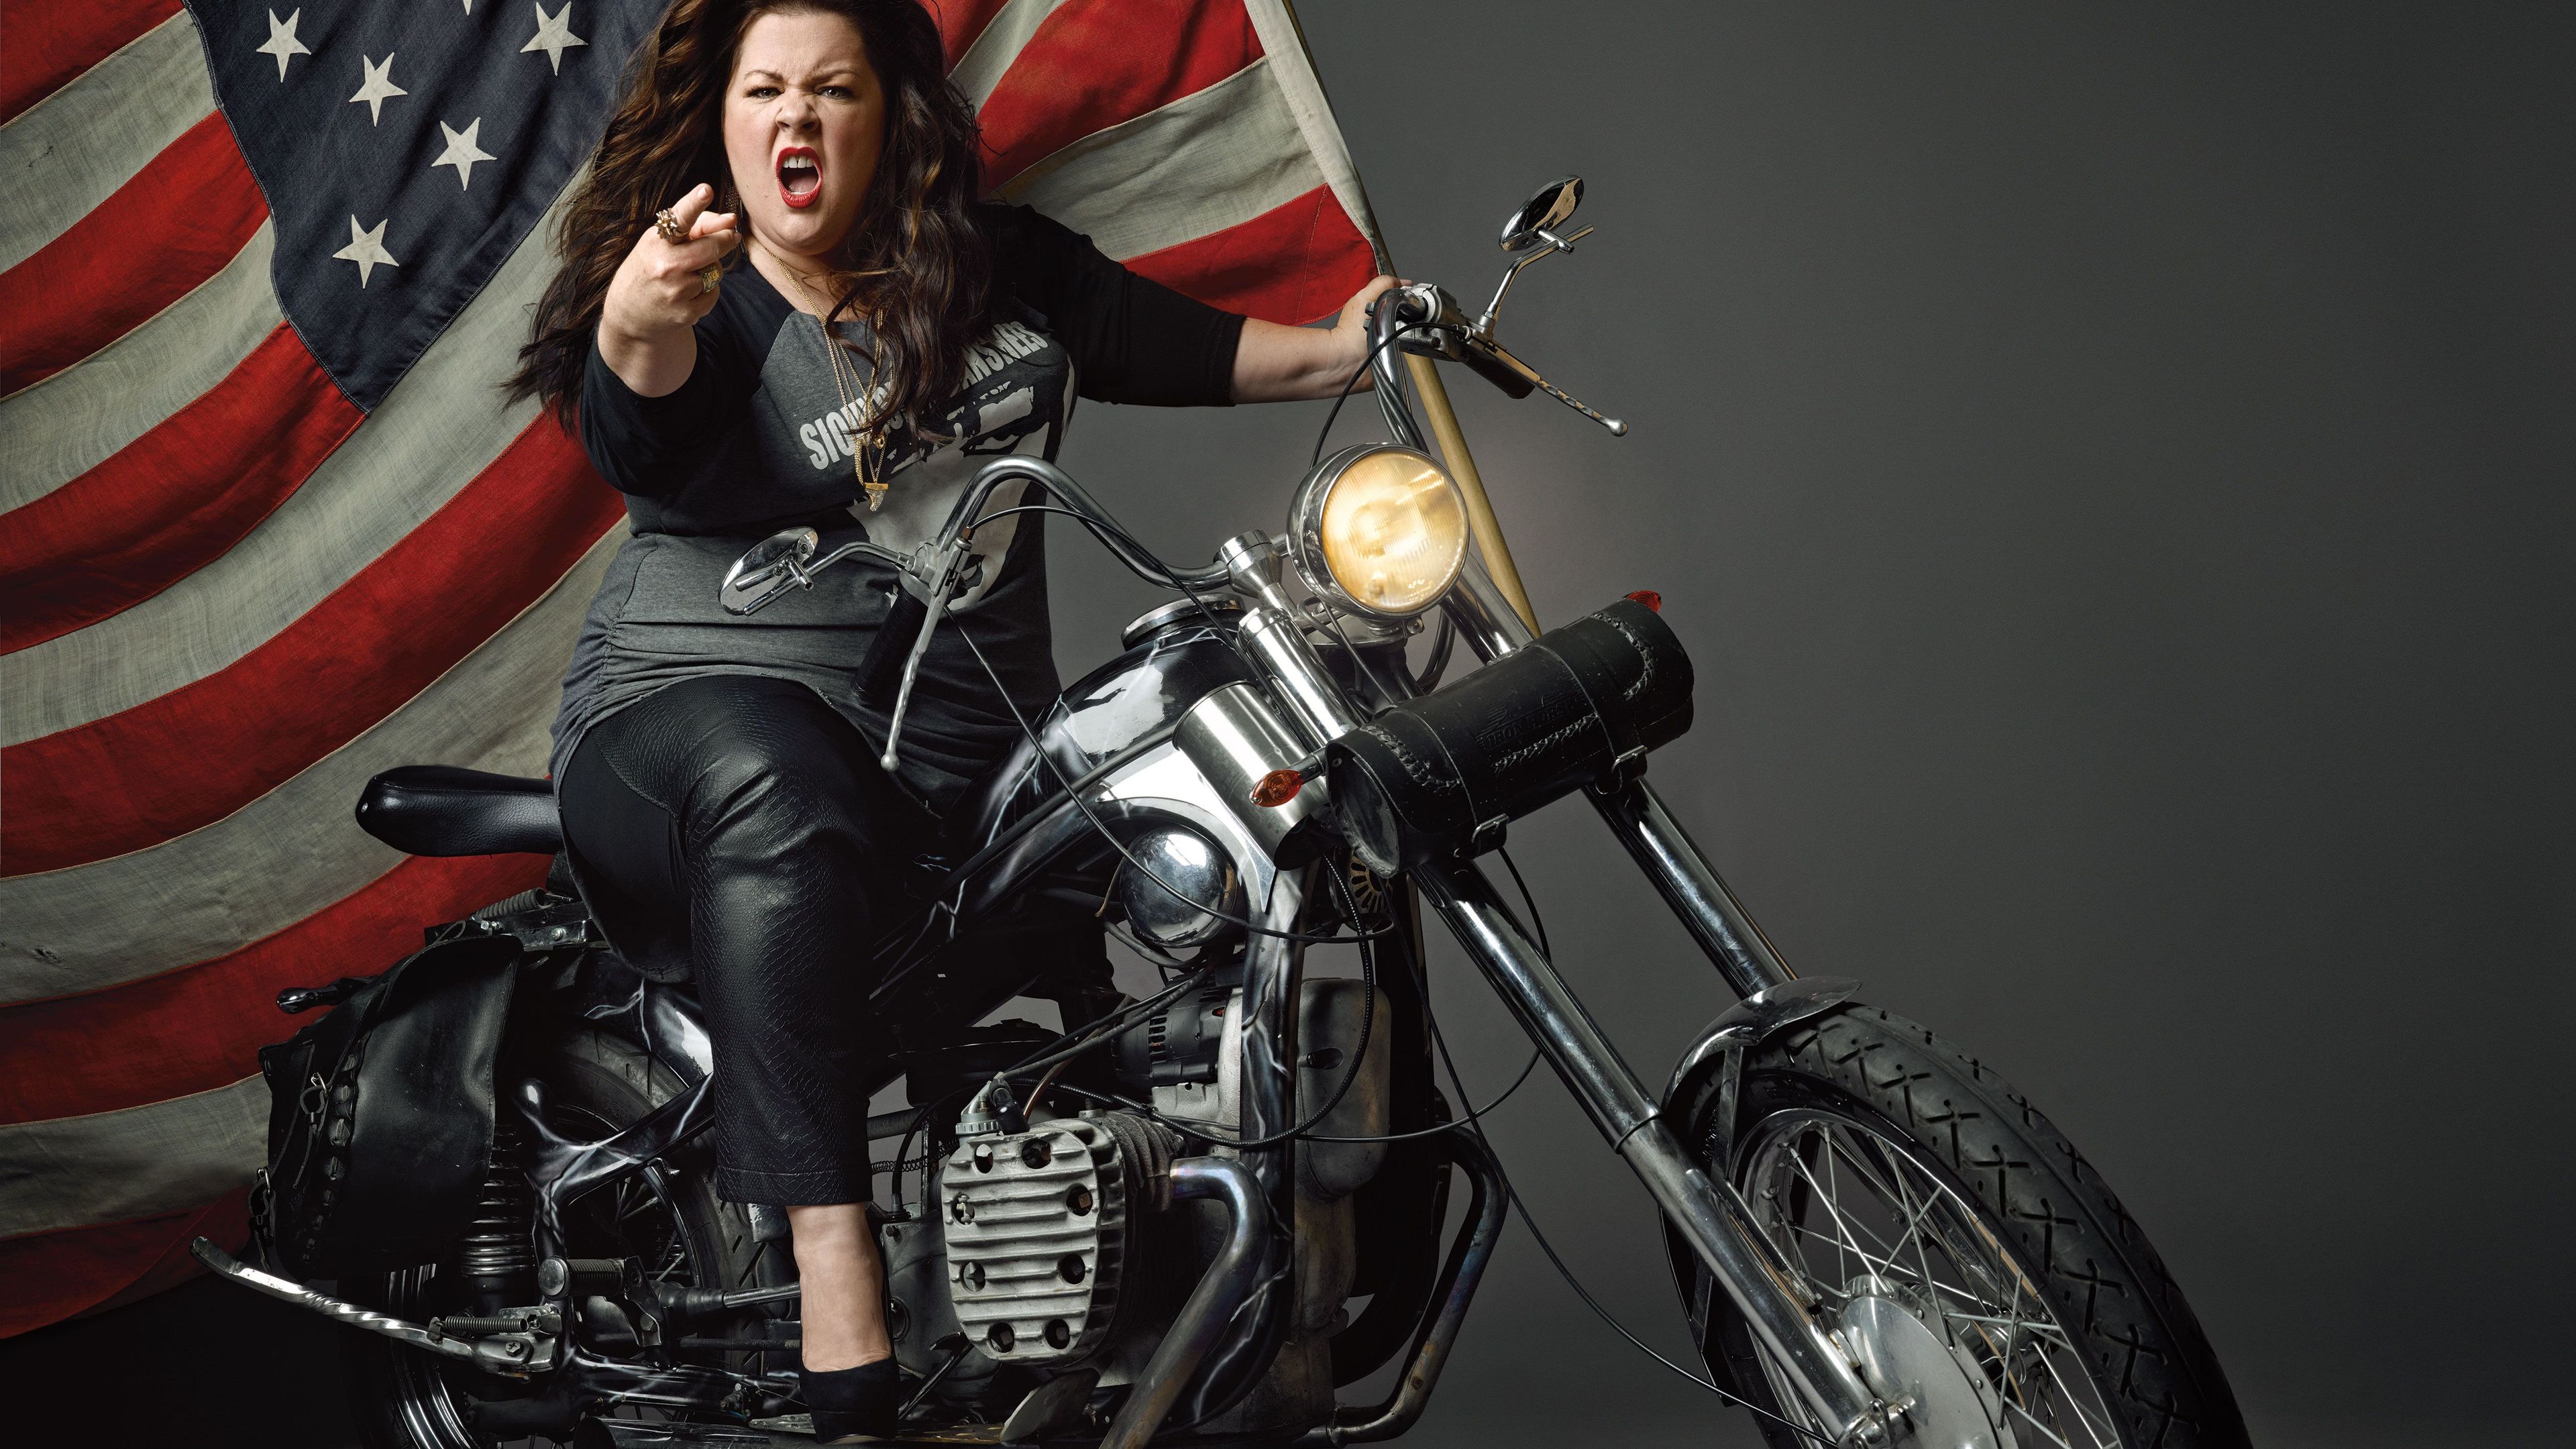 melissa mccarthy the rolling stone 1542236263 - Melissa McCarthy The Rolling Stone - women wallpapers, melissa mcCarthy wallpapers, hd-wallpapers, celebrities wallpapers, 4k-wallpapers